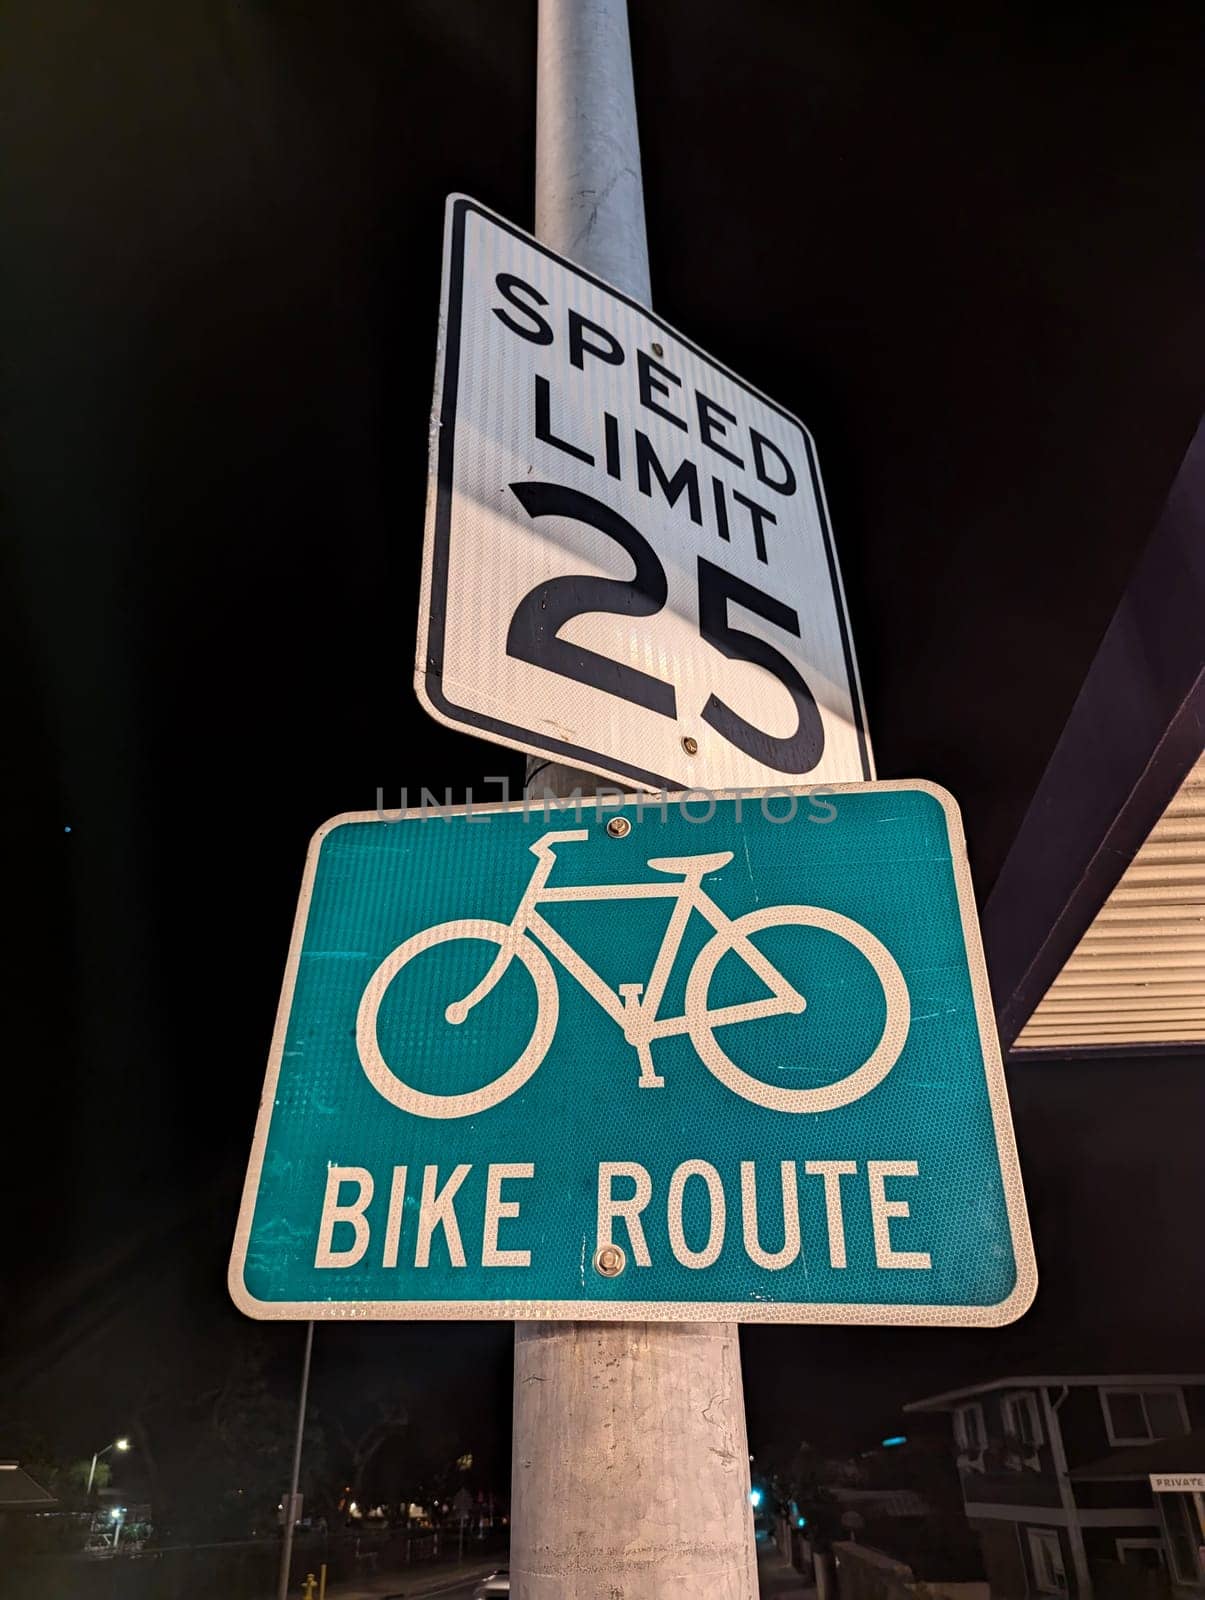 Honolulu - March 21, 2023: Two essential road signs illuminated under the city lights at night. The top sign indicates a speed limit of 25, ensuring drivers maintain a safe speed, while the vibrant green sign below marks the path as a designated bike route, highlighting the city’s commitment to safety and eco-friendly transportation options.
